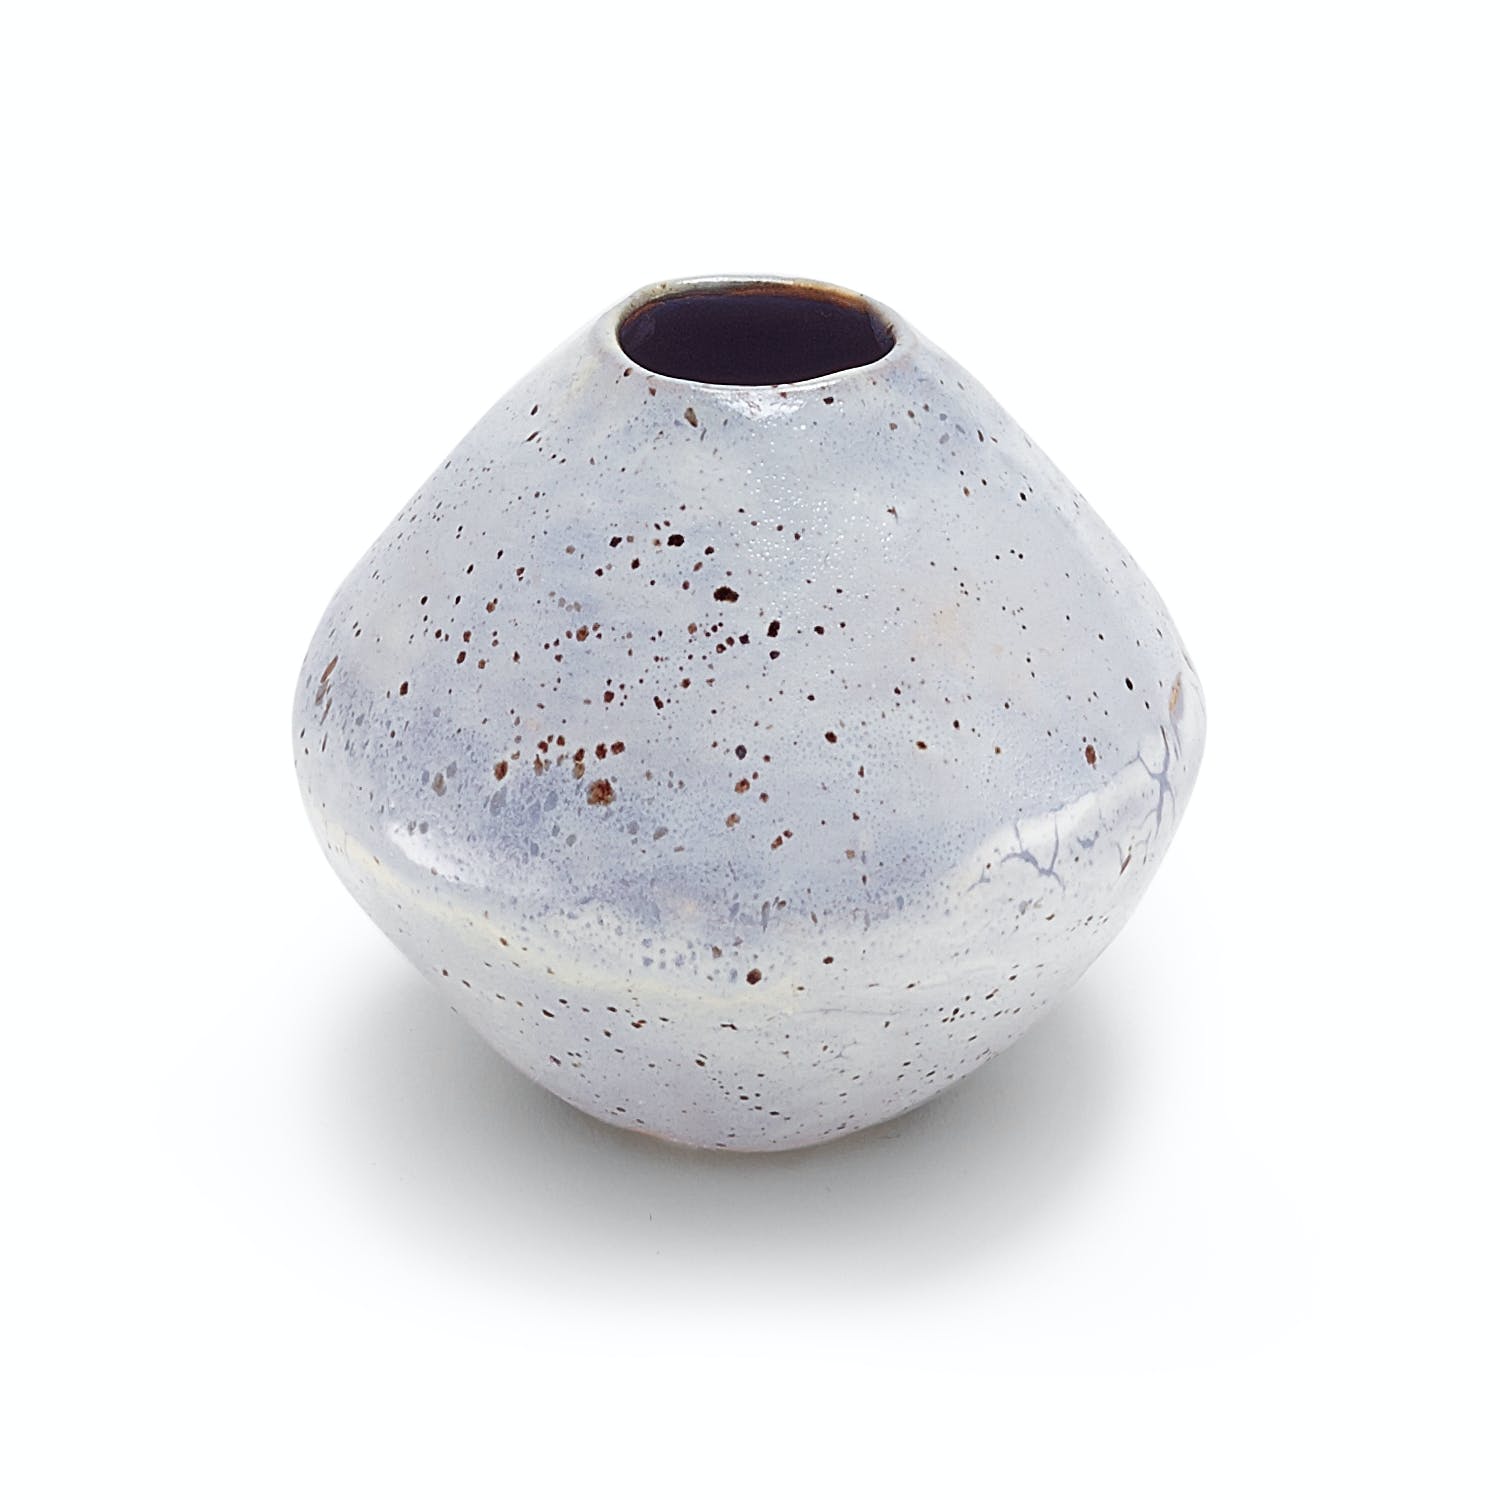 Hand-crafted ceramic vase with a rustic, speckled appearance on white background.